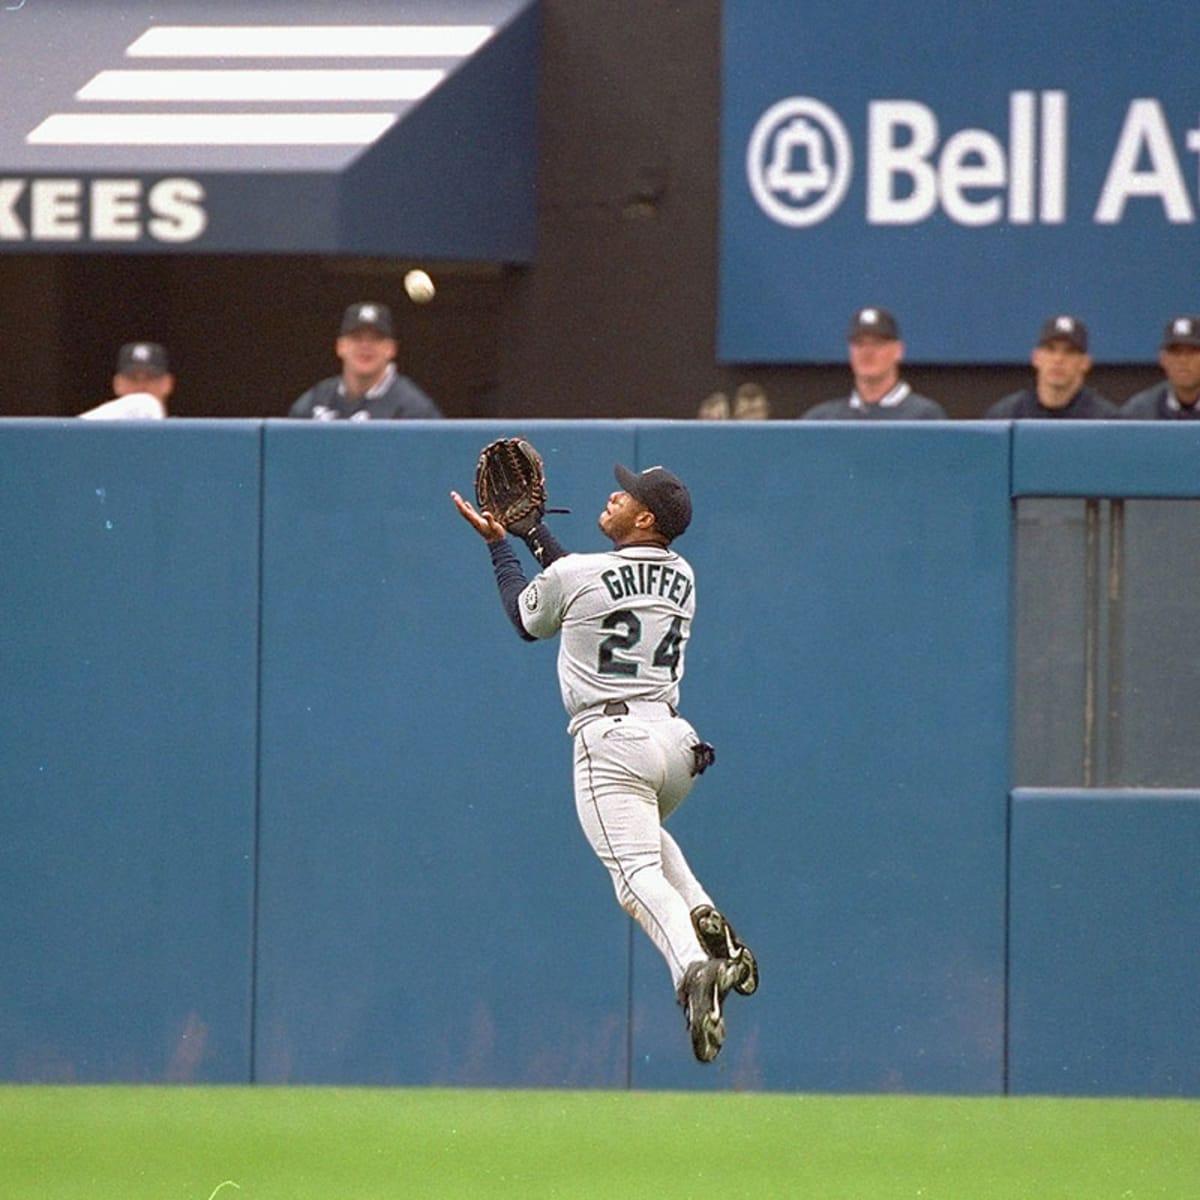 Seattle Mariners - Iconic. In 1995, Ken Griffey Jr. met with